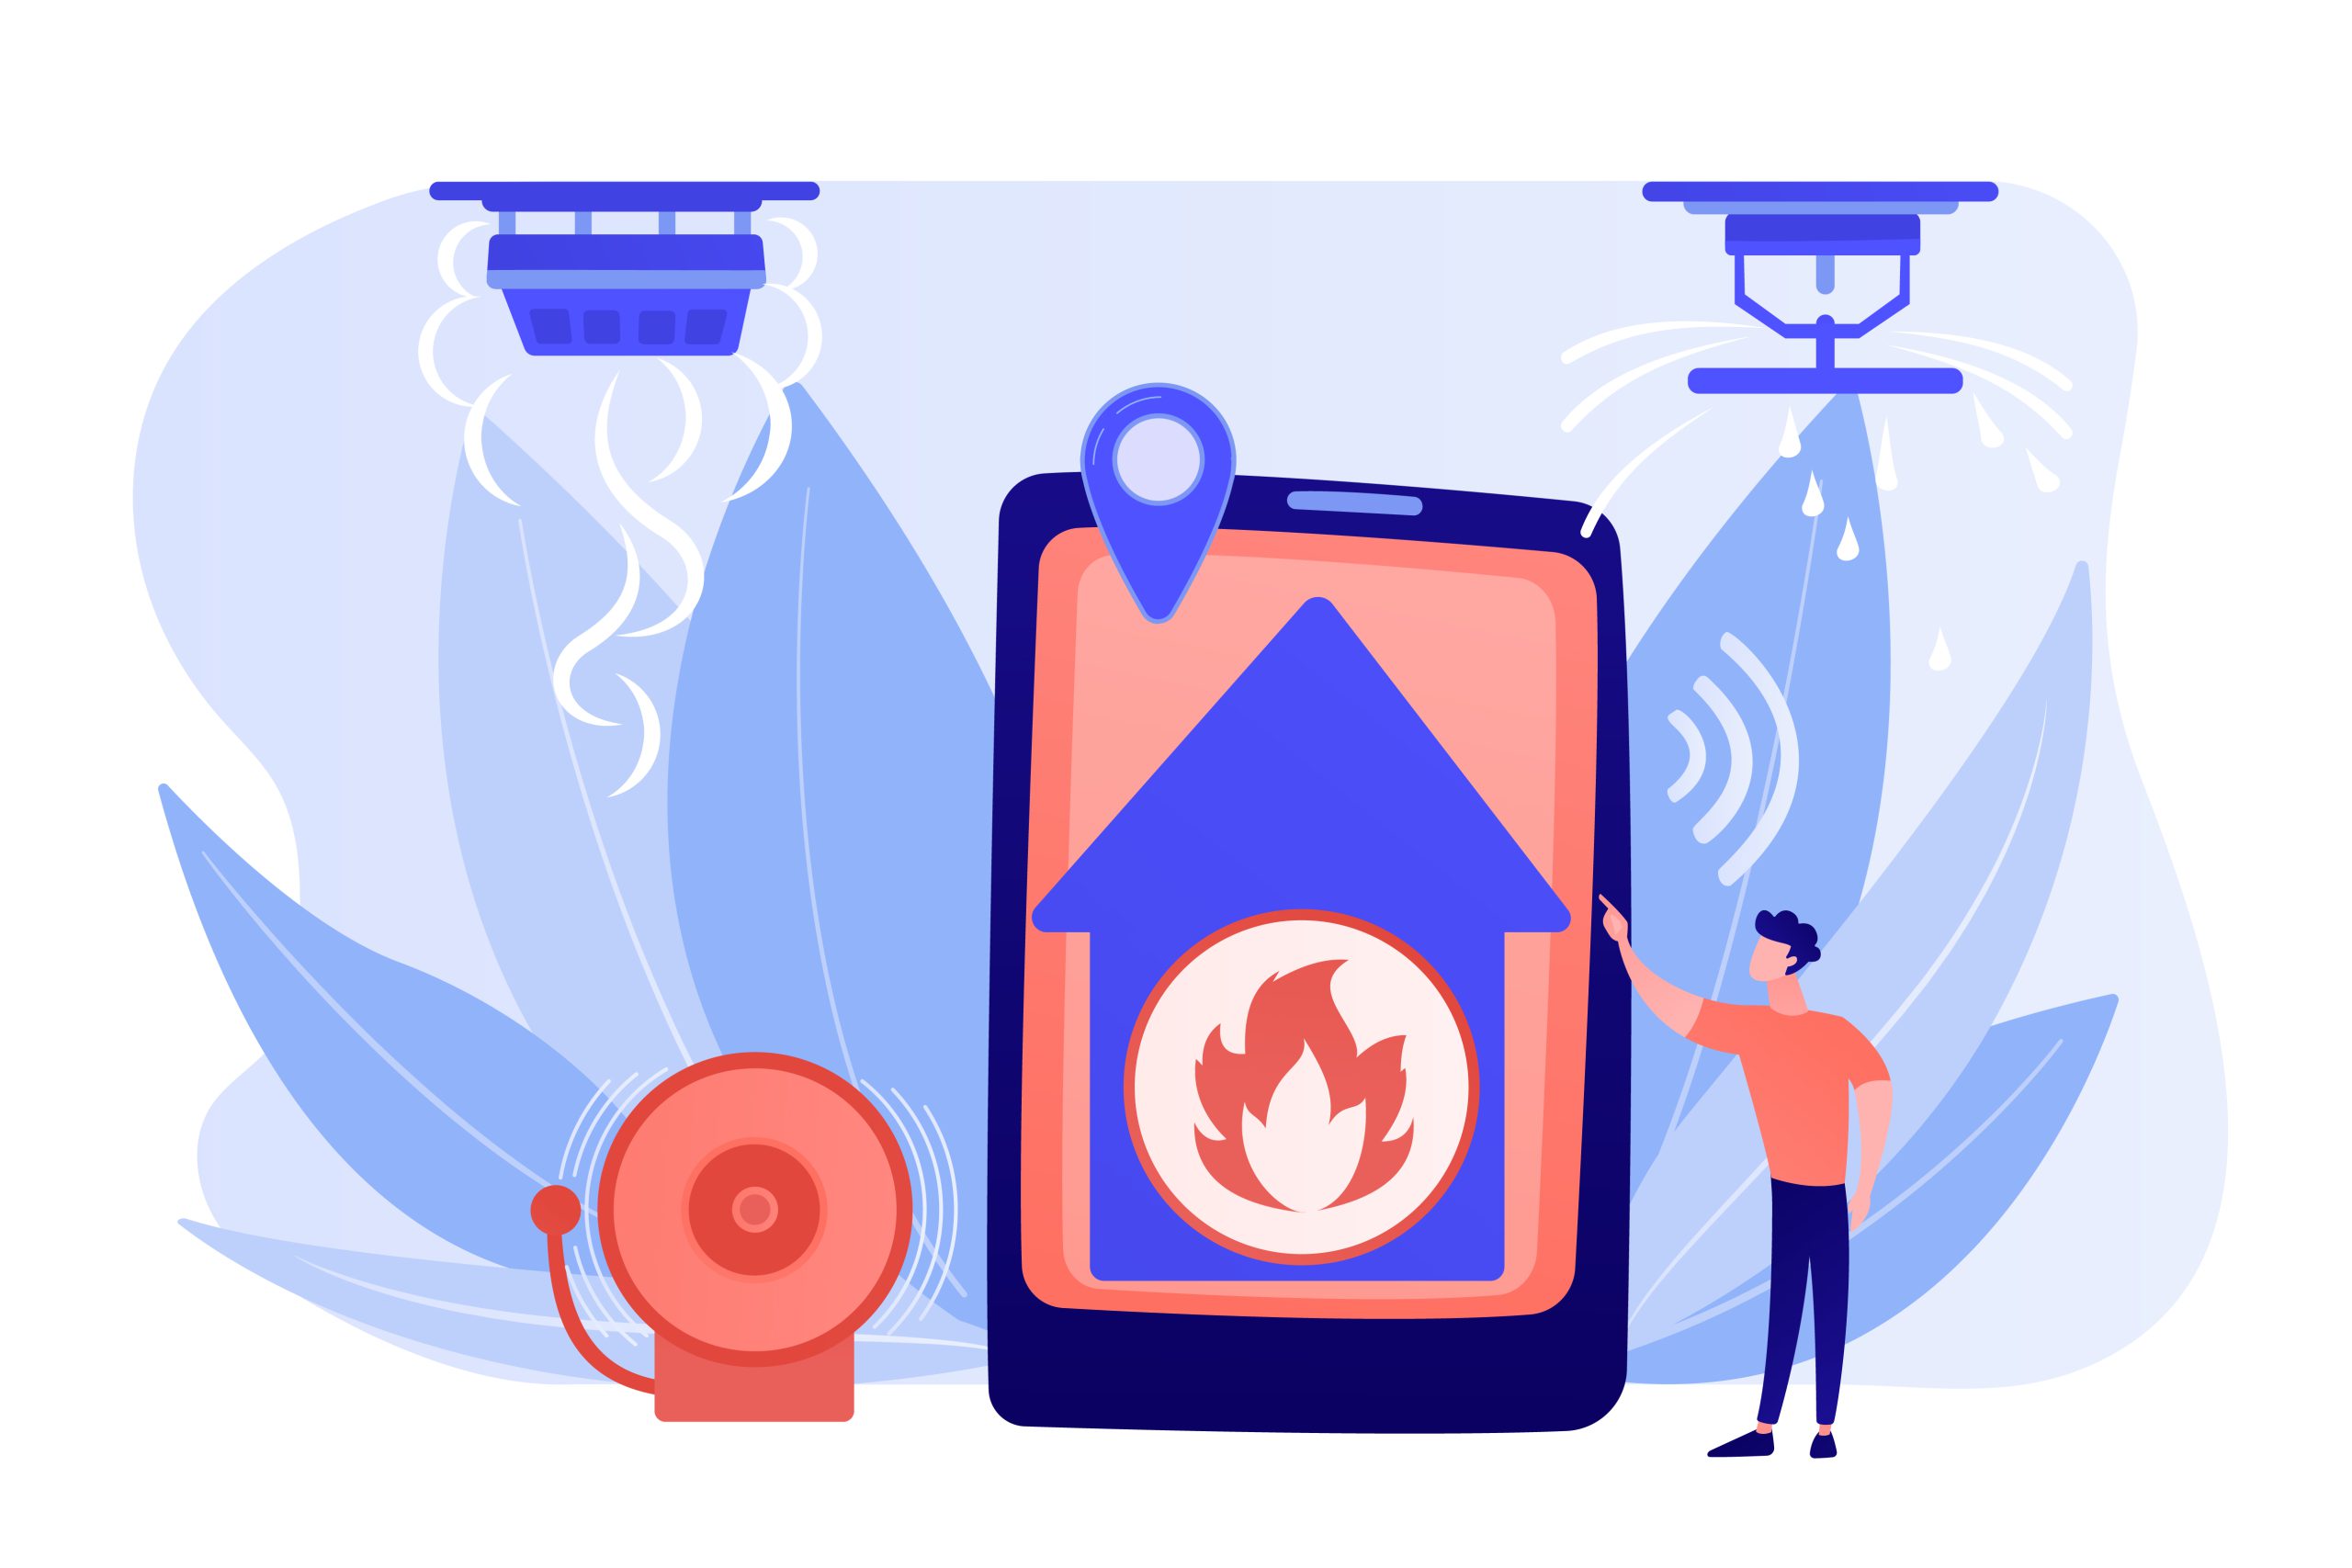 Flame in house remote notification. Smart home, high tech. Fire alarm system, fire prevention methods, smoke and fire alarm concept. Pinkish coral bluevector isolated illustration